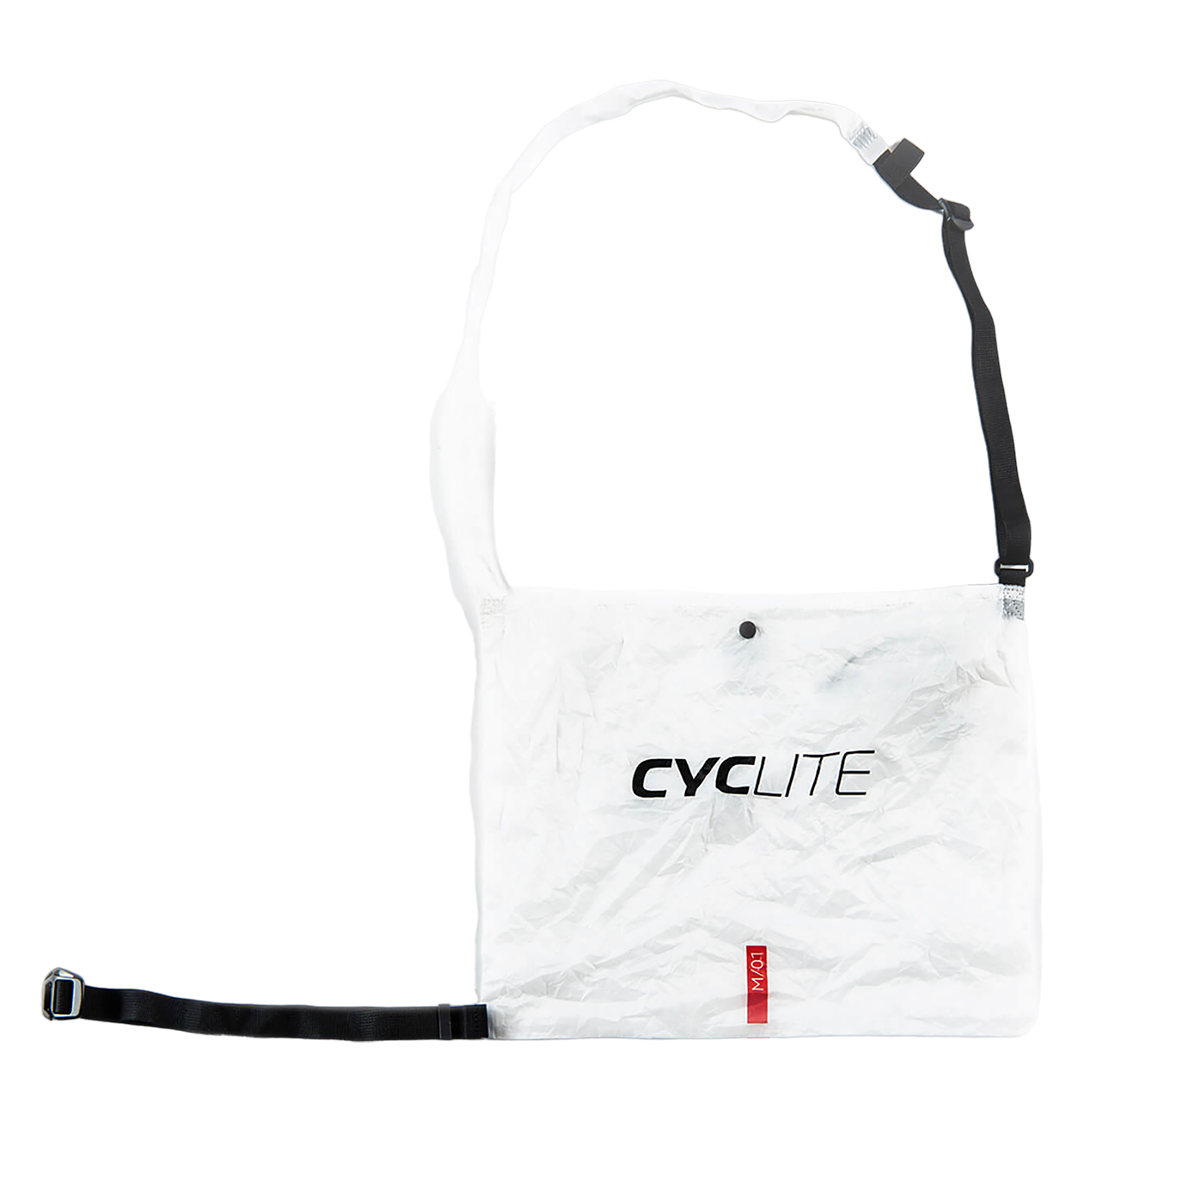 MUSETTE / 01 - Cycling Bag - White